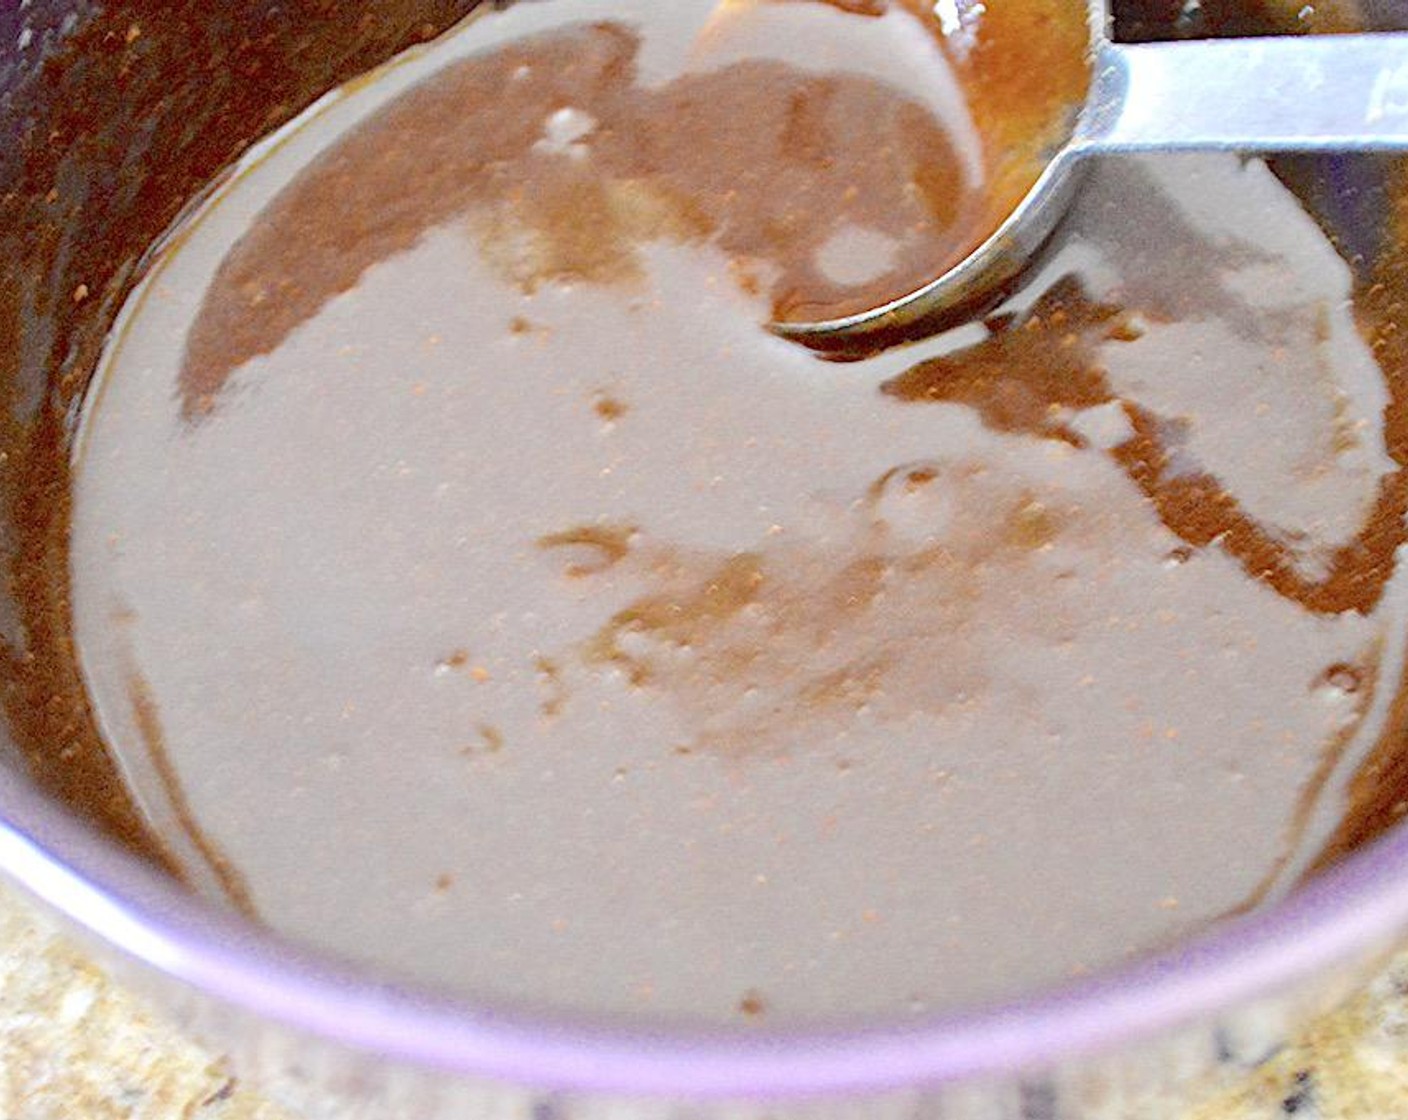 step 3 In another bowl, mix the Ketchup (1/4 cup), Dark Brown Sugar (3 Tbsp), Dry Mustard (1 tsp), and Ground Nutmeg (1/4 tsp) together into a thick glaze.